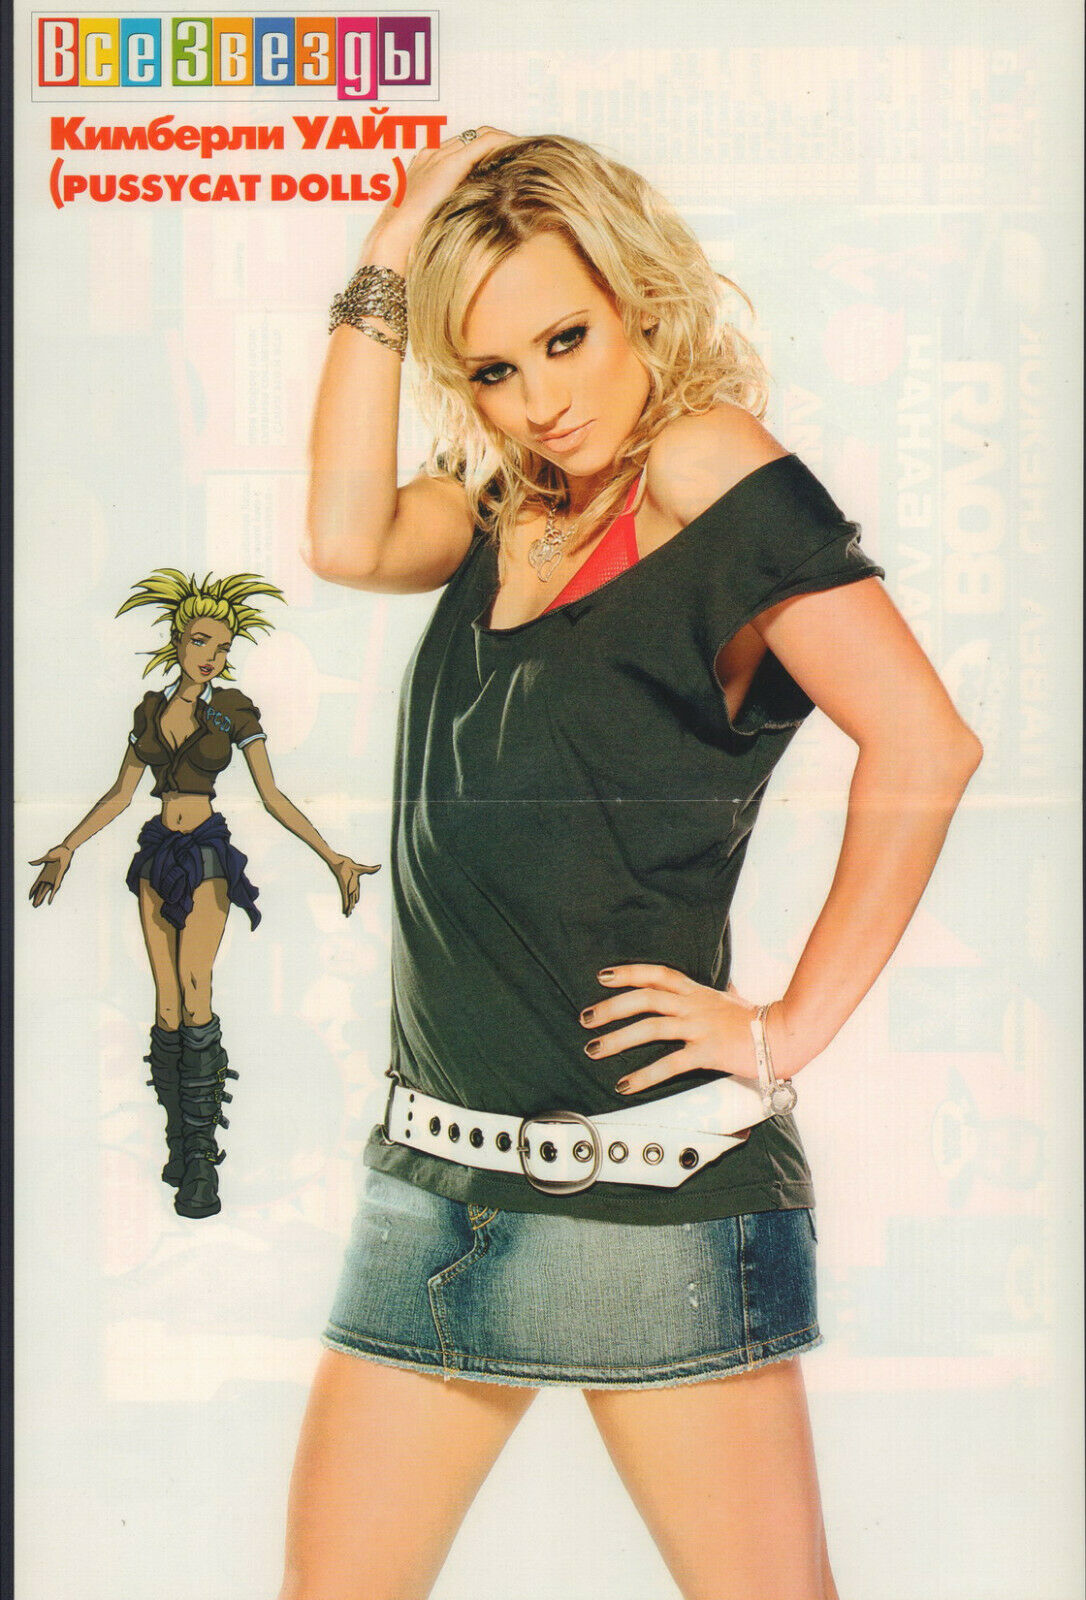 Pussycat Dolls Kimberly Wyatt Russian Centerfold Poster 2007 In Mint Condition